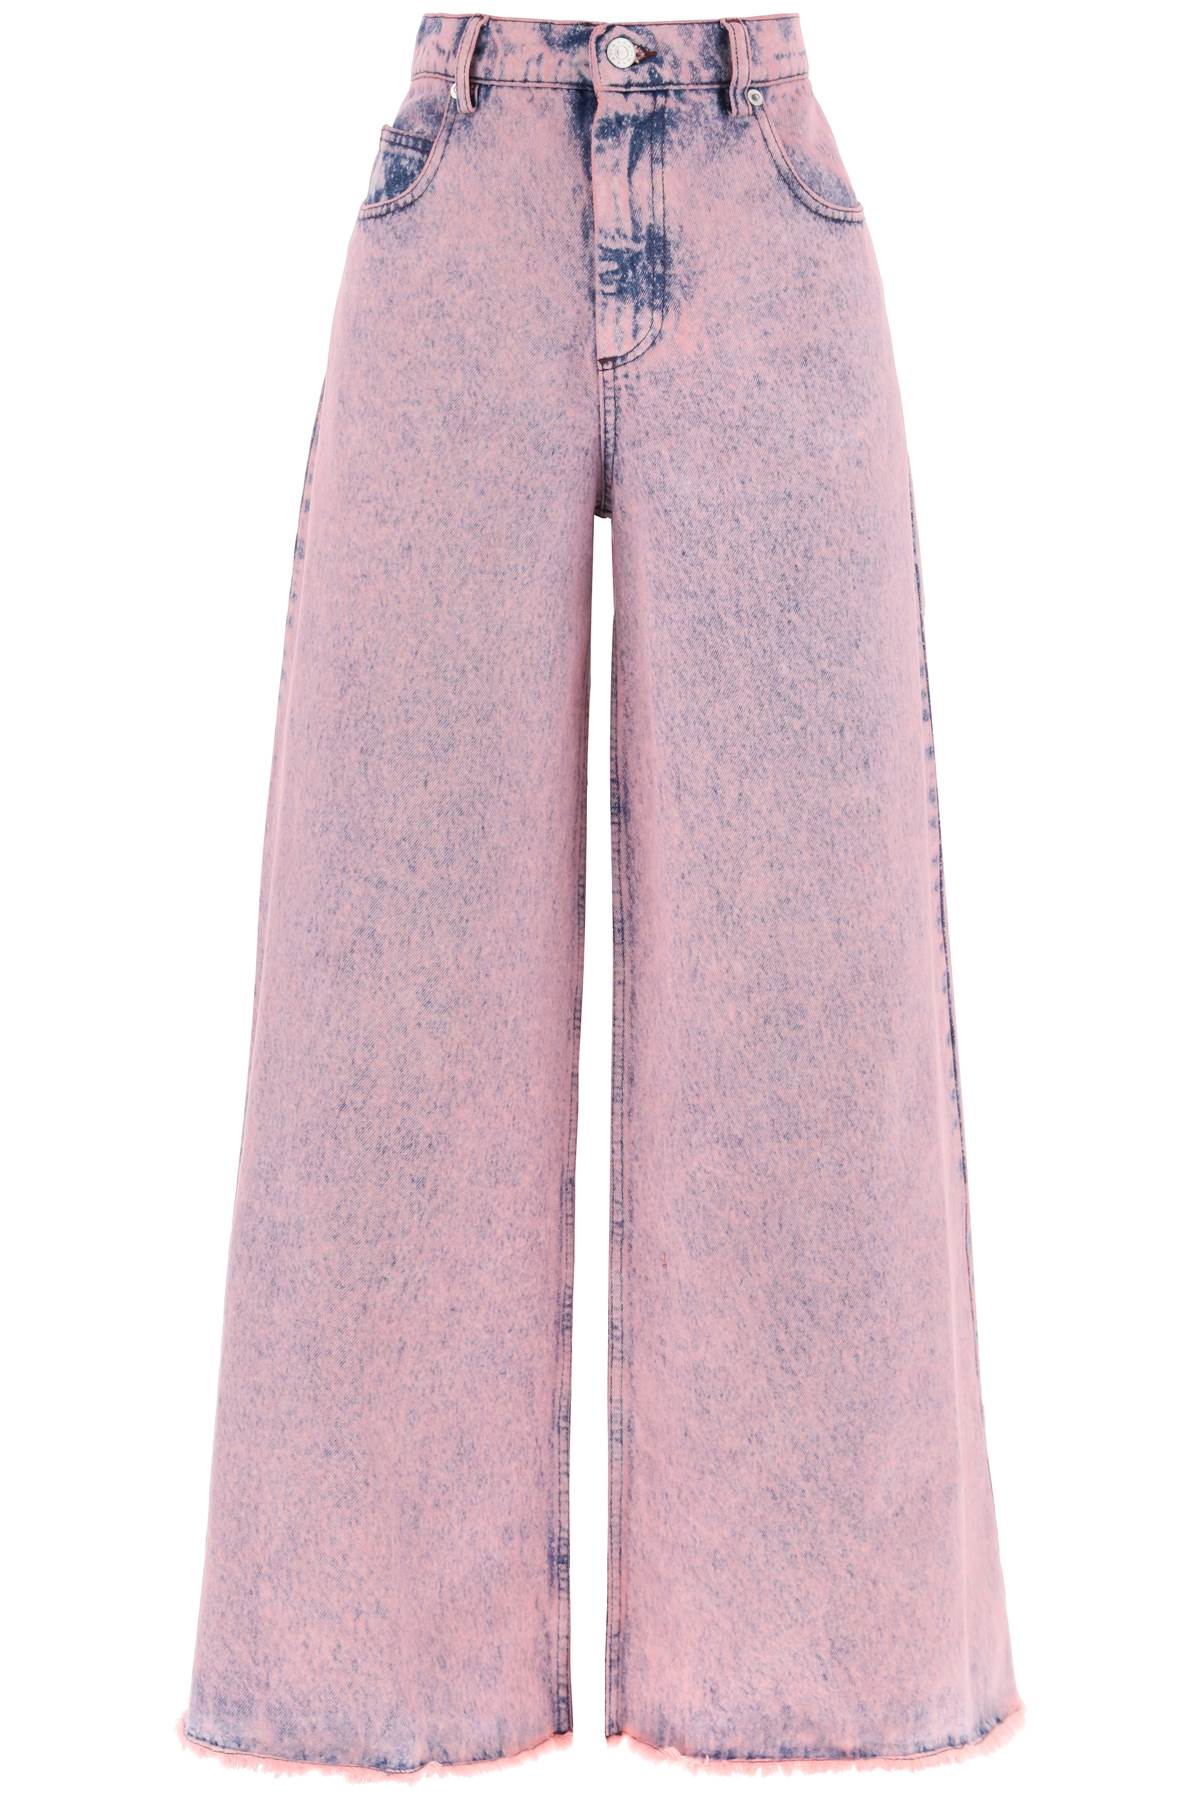 Marni wide leg jeans in overdyed denim-0